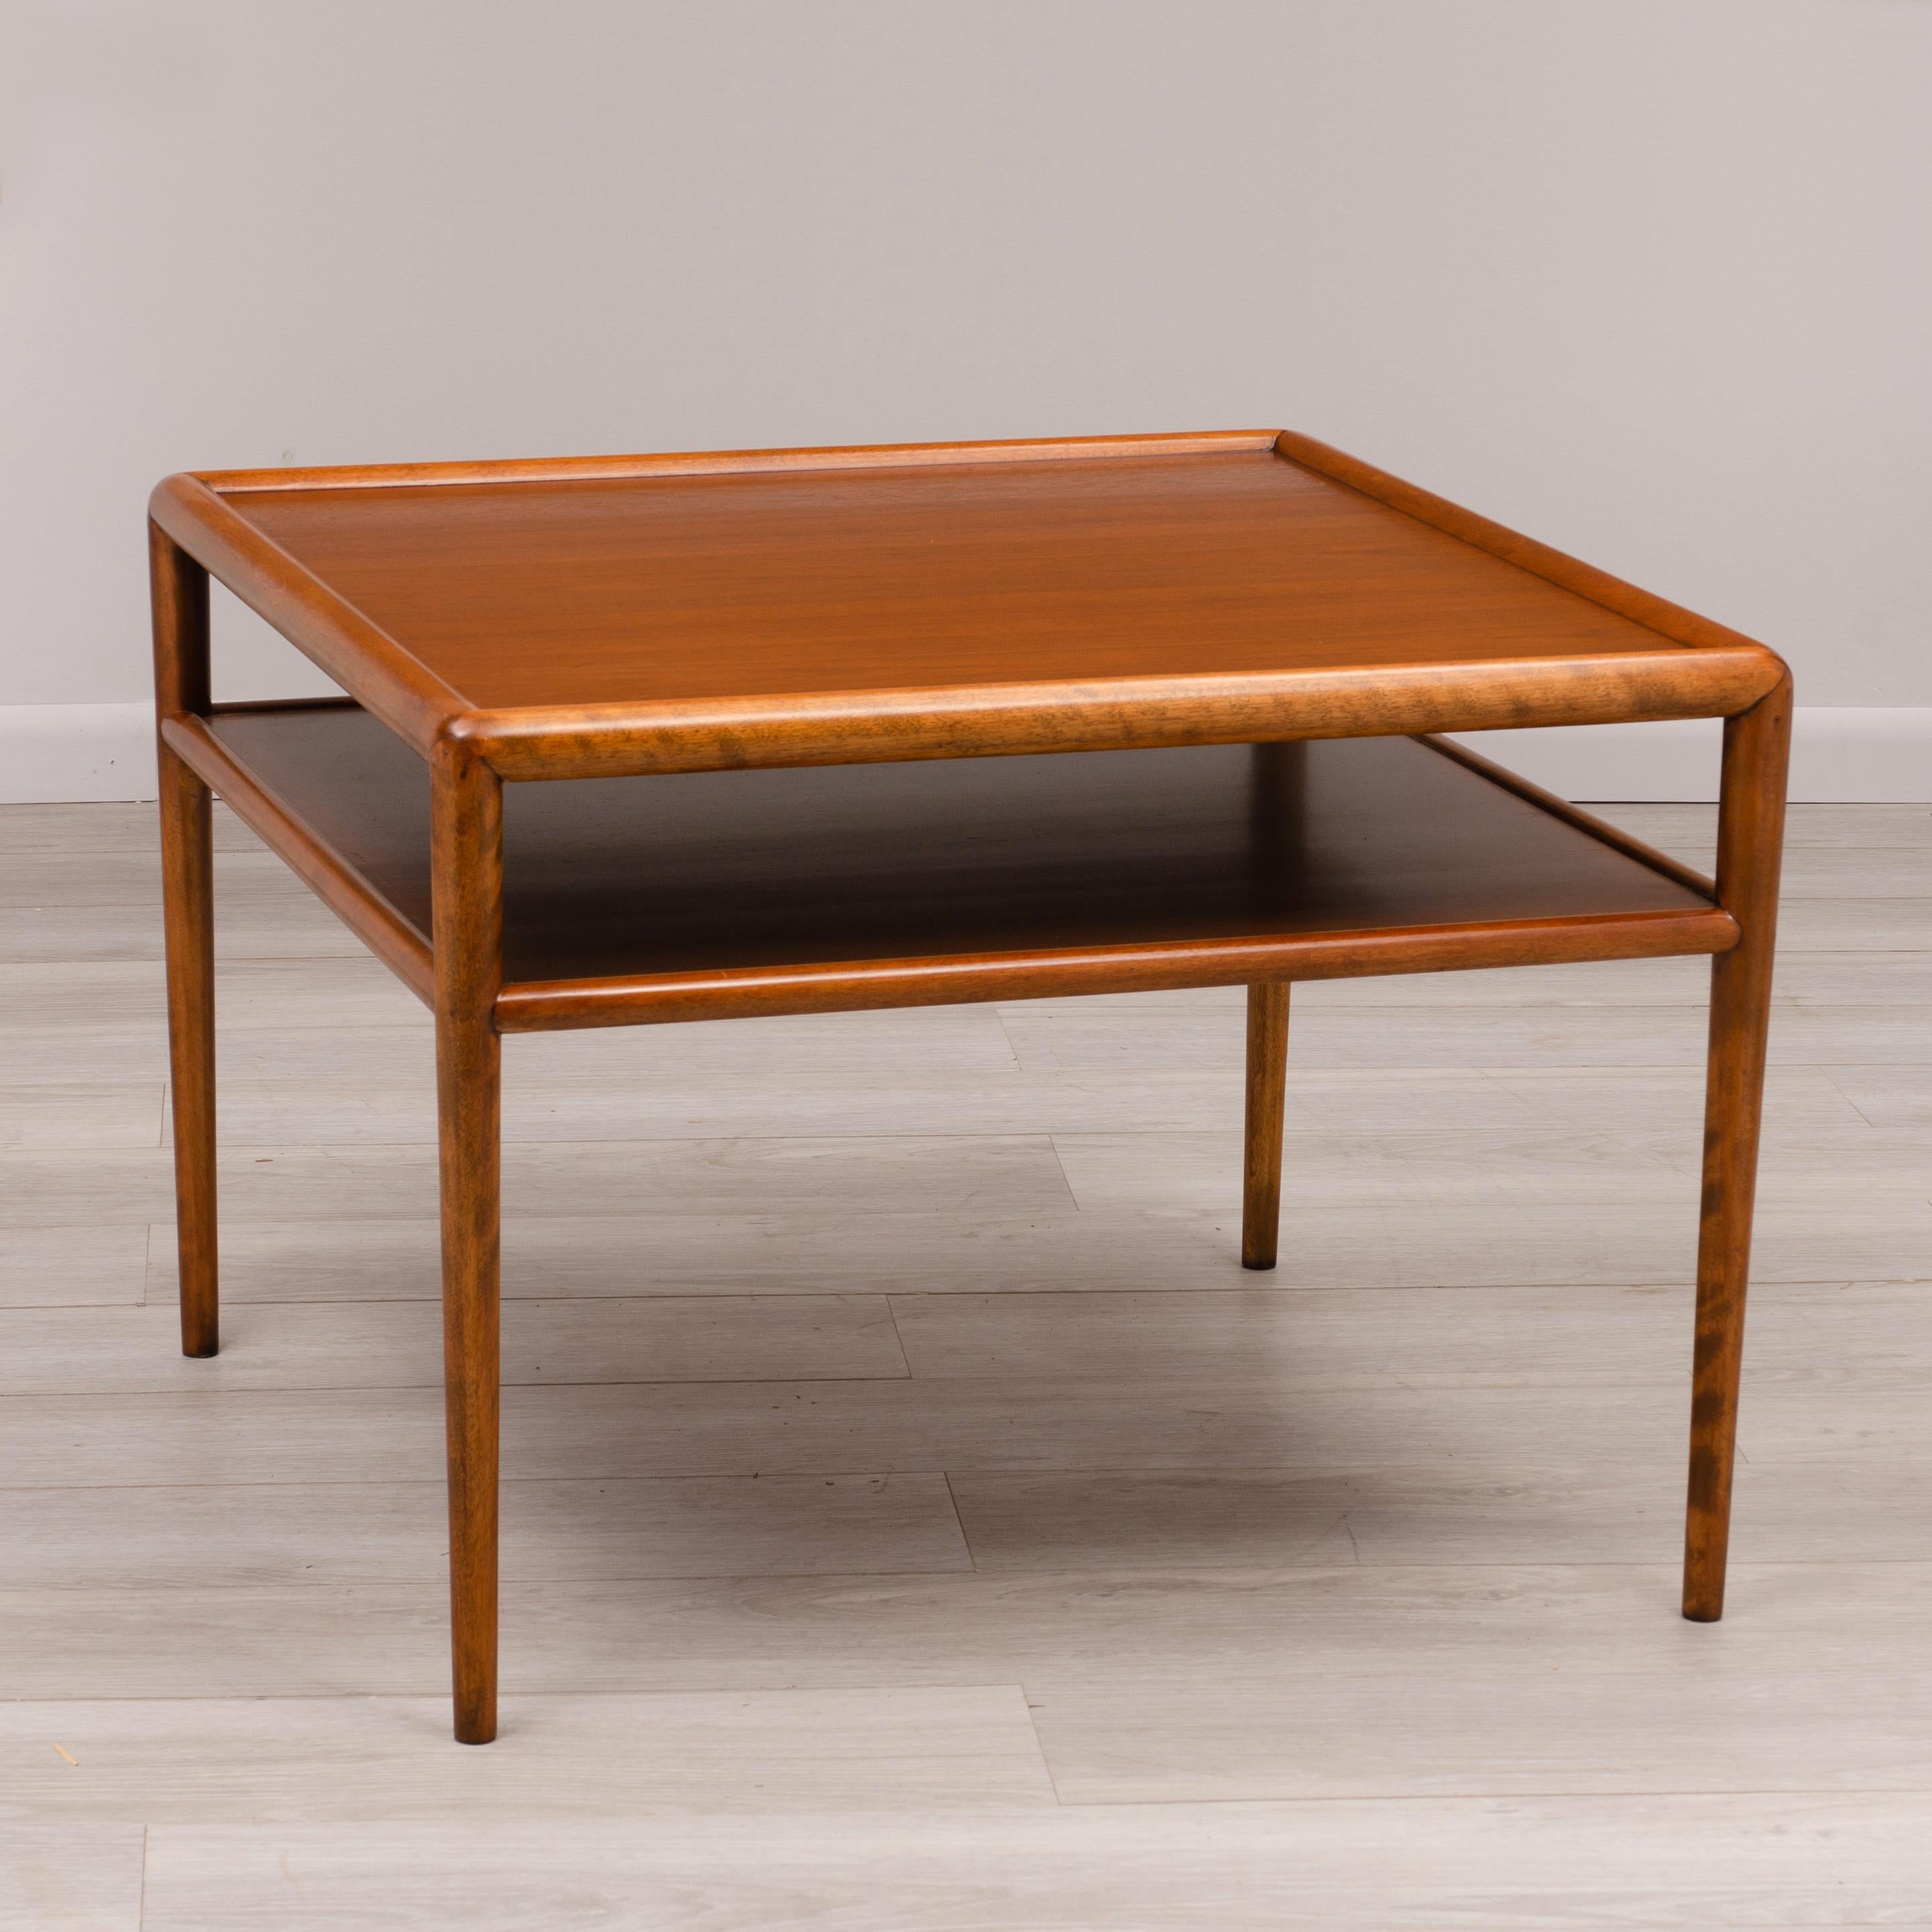 A Mid-Century Modern mahogany two tiered table designed by T. H. Robsjohn-Gibbings for Widdicomb. Made in July of 1953.